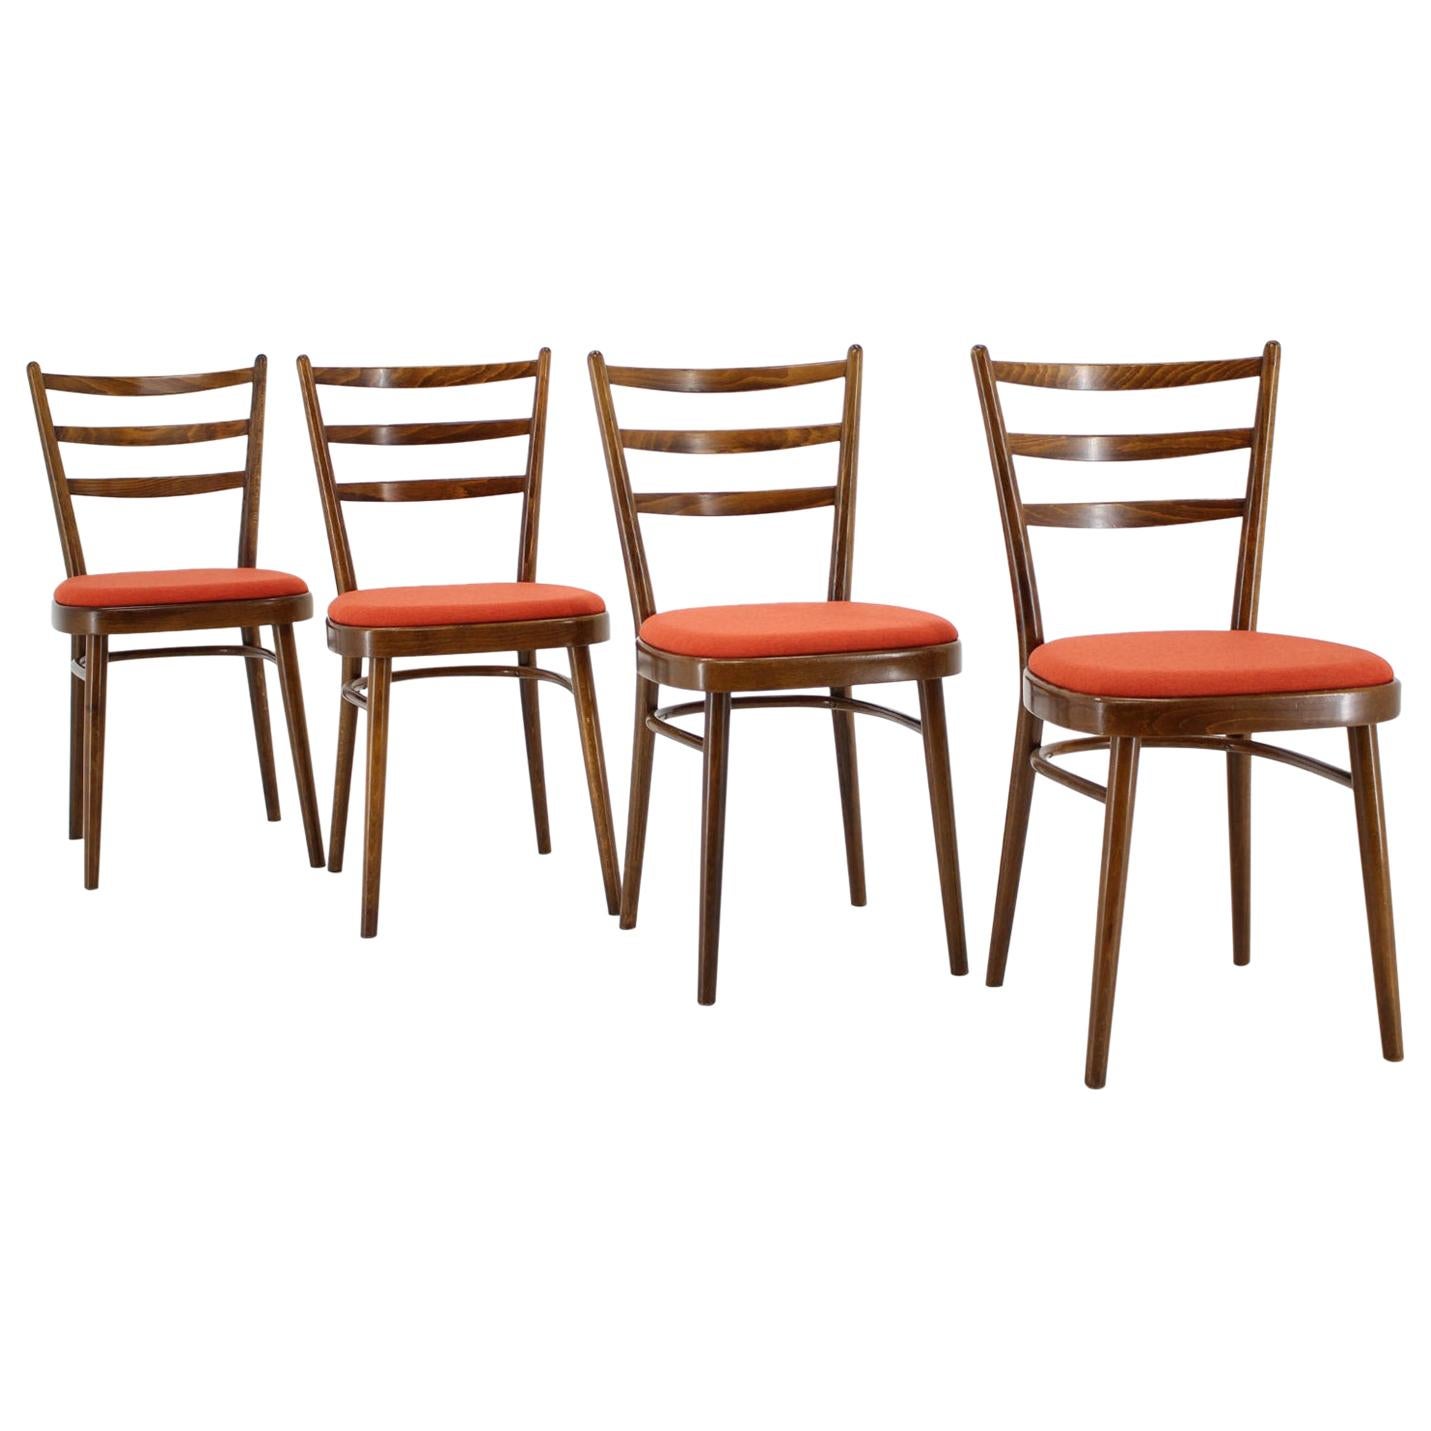 Set of Four Dining Chairs, Czechoslovakia, 1965